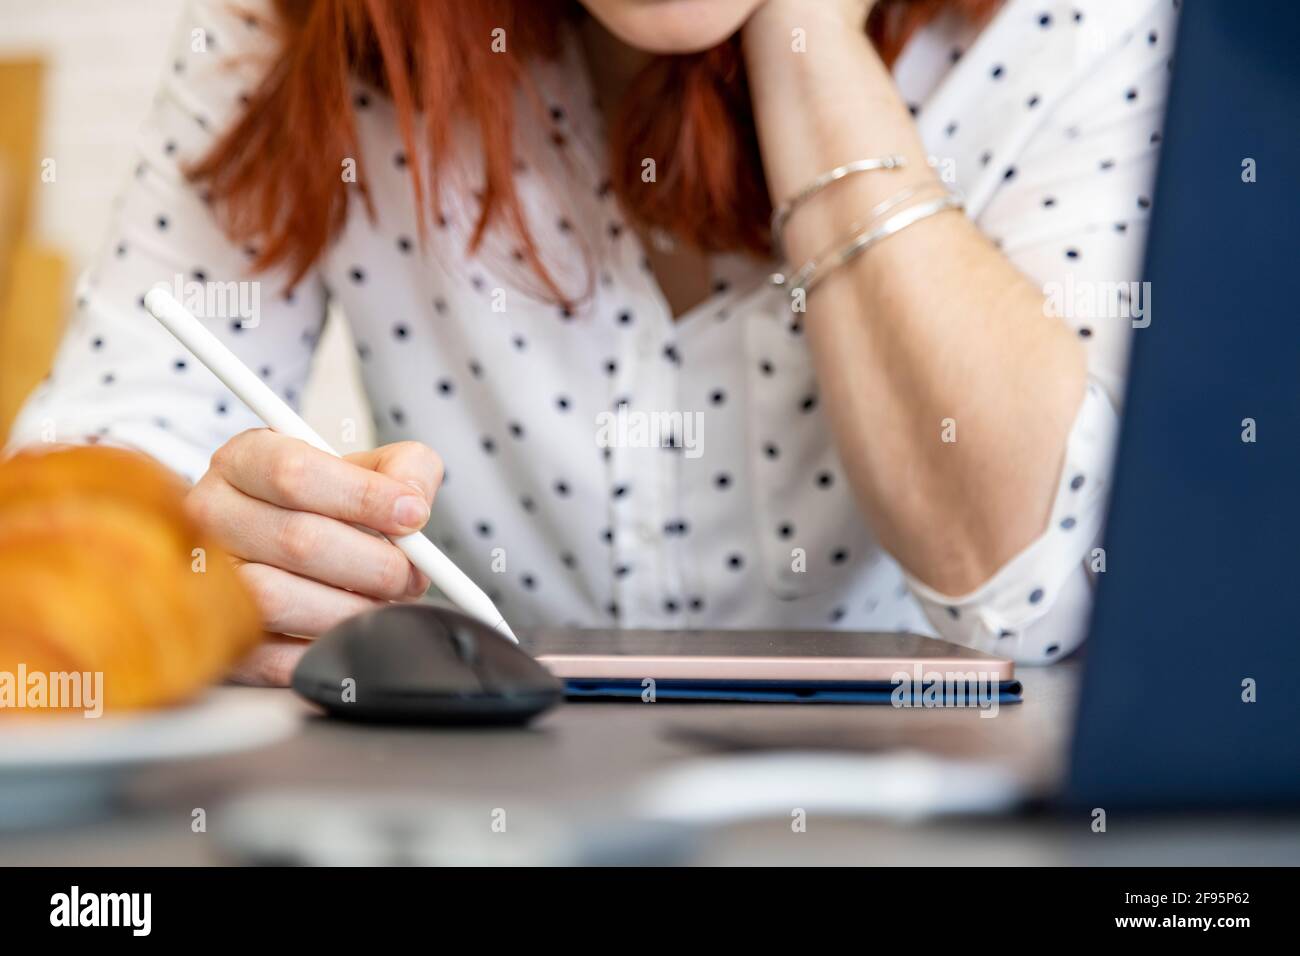 woman draws on a digital tablet with a touch screen. no face. close-up. Stock Photo